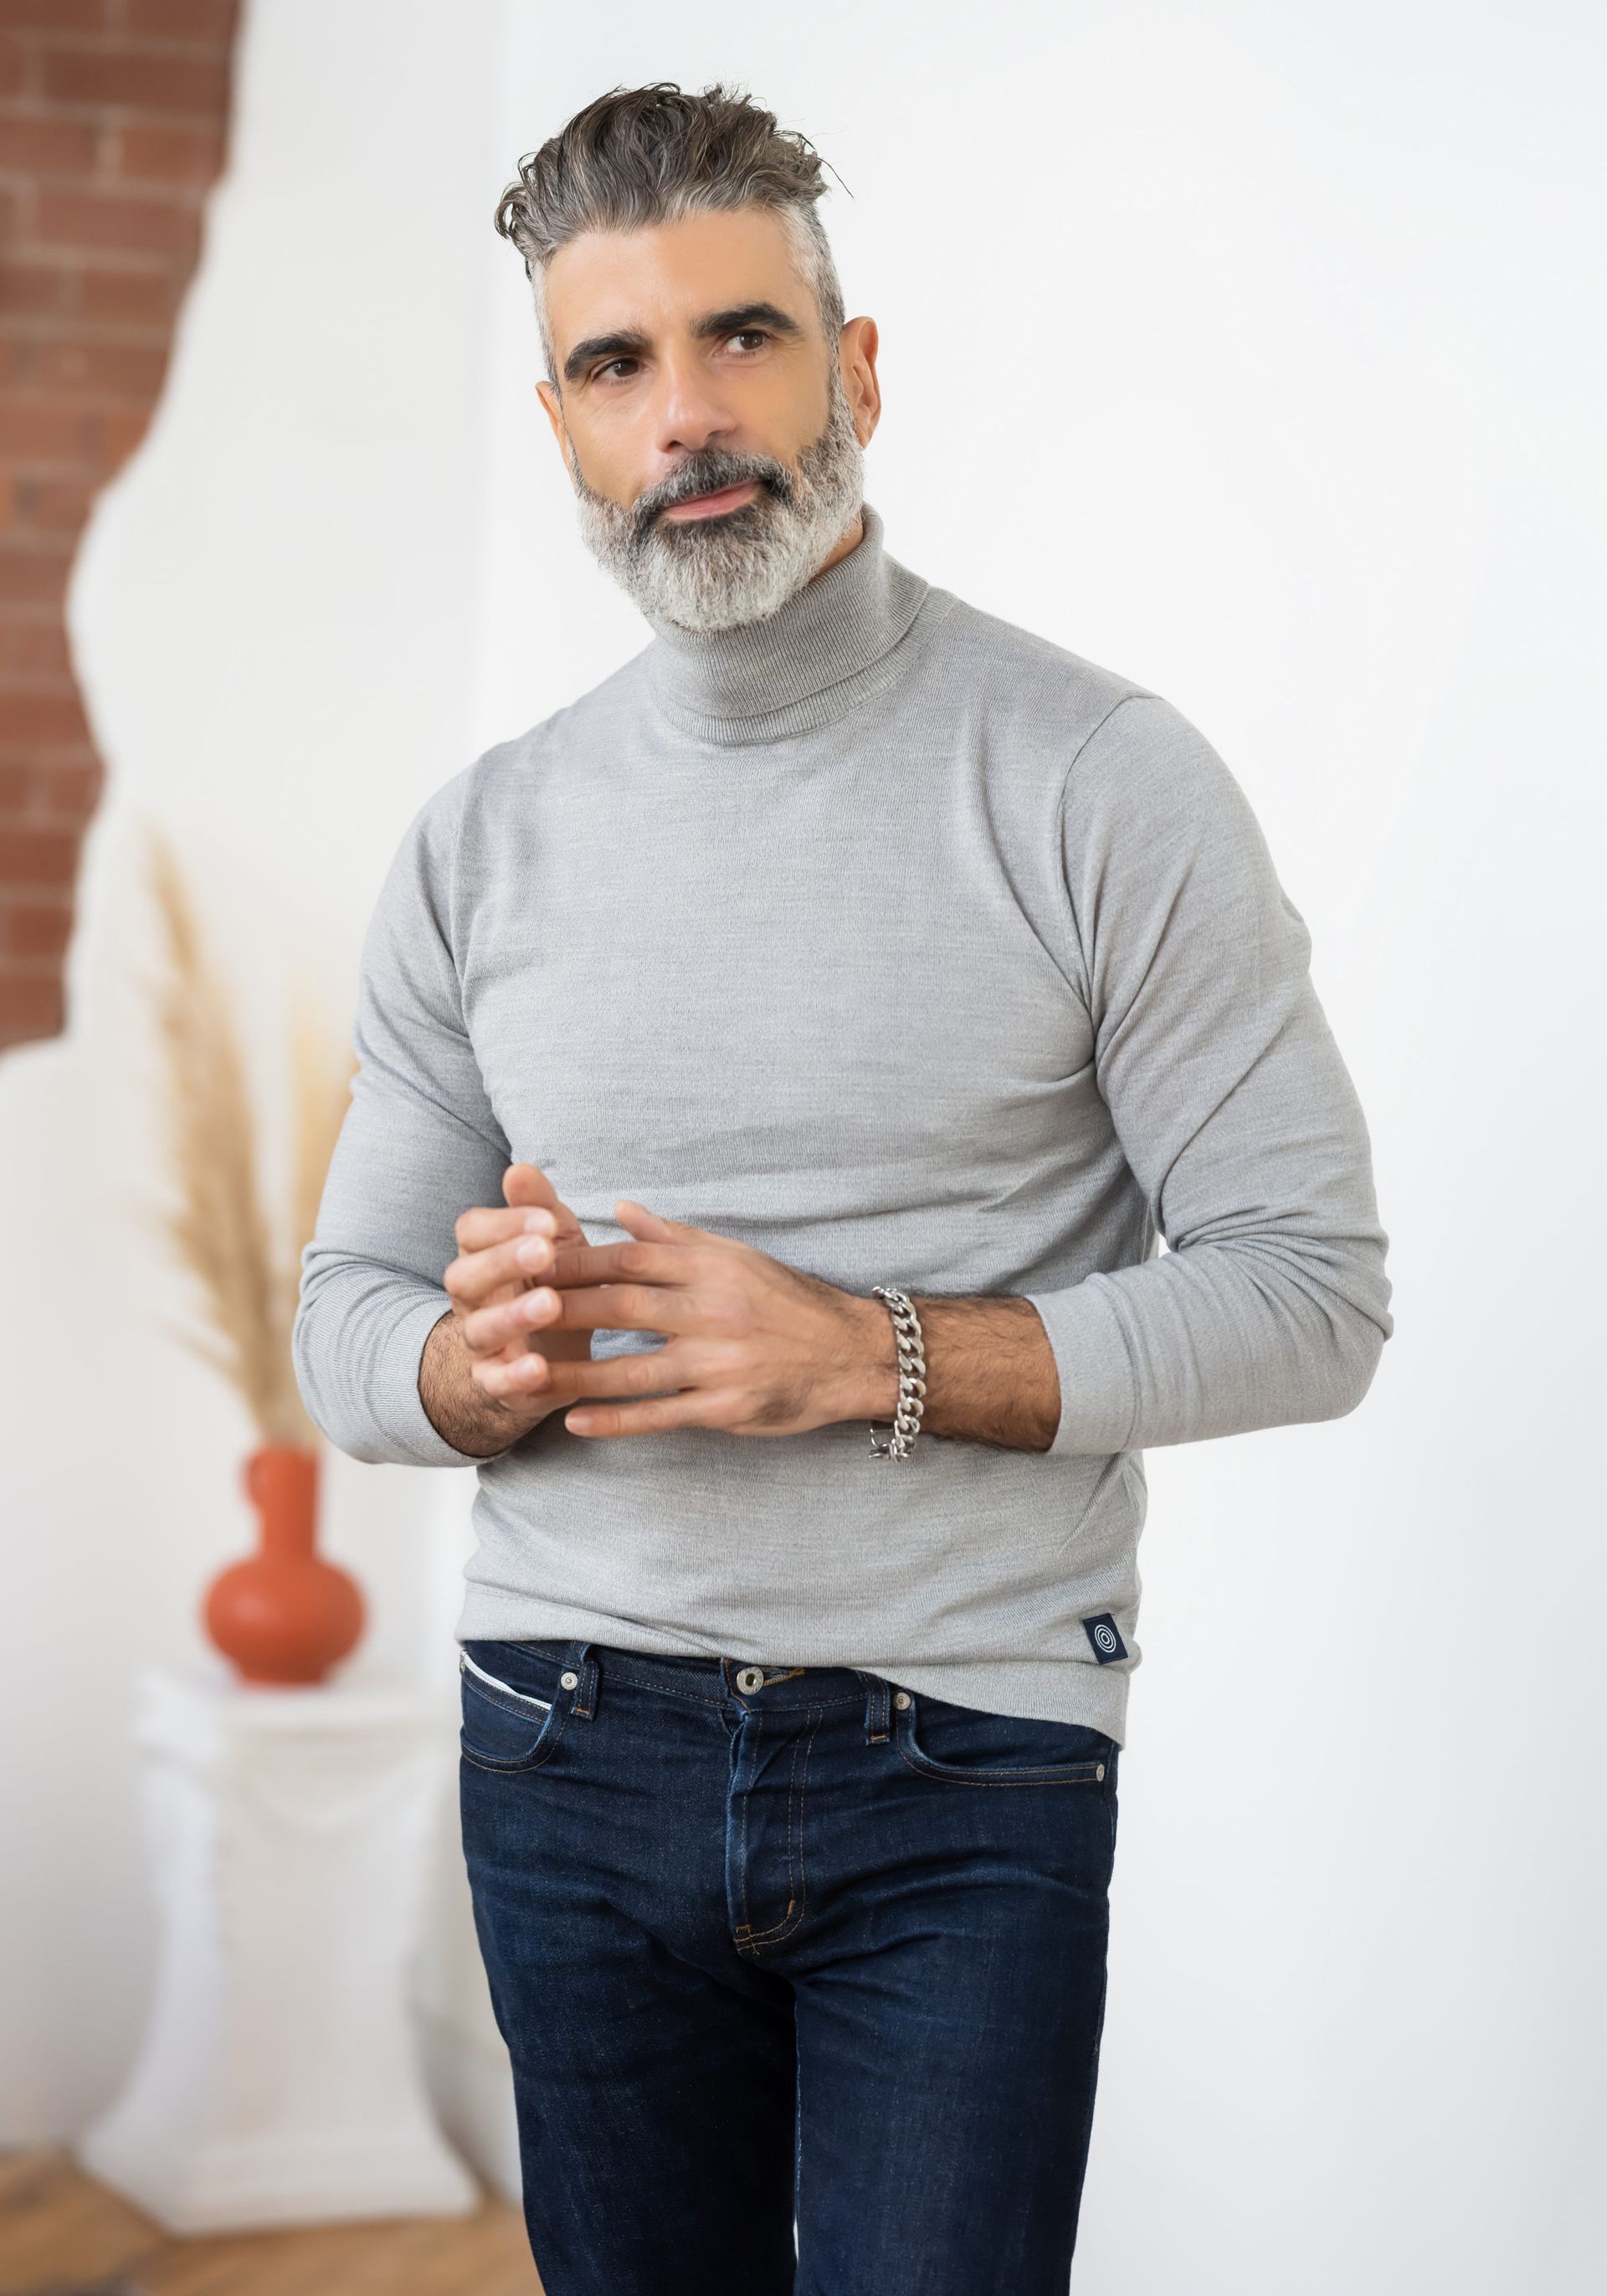 A man wearing a grey turtle neck sweater and jeans for his professional LinkedIn headshot.